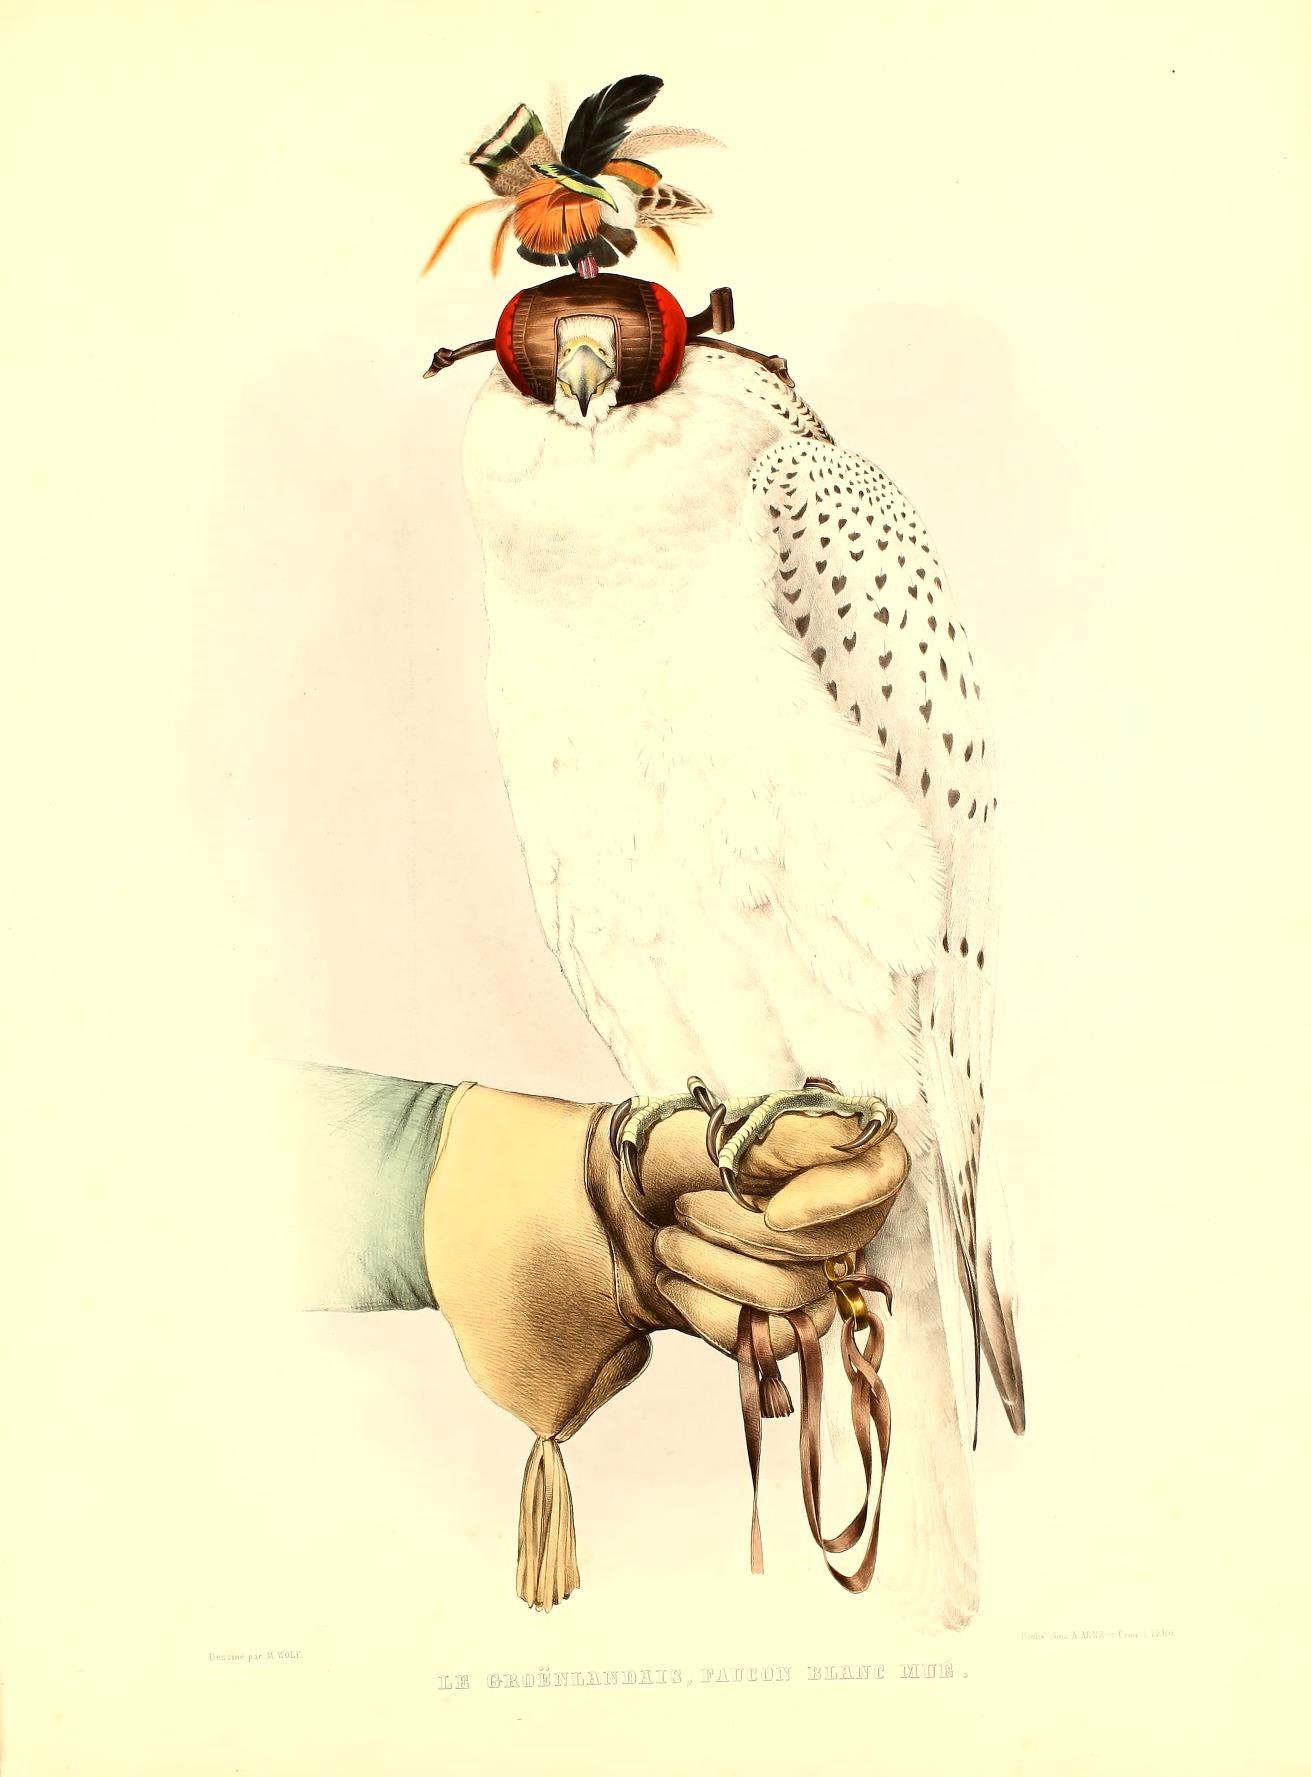 this illustration depicts a large owl sitting on the palm of an arm